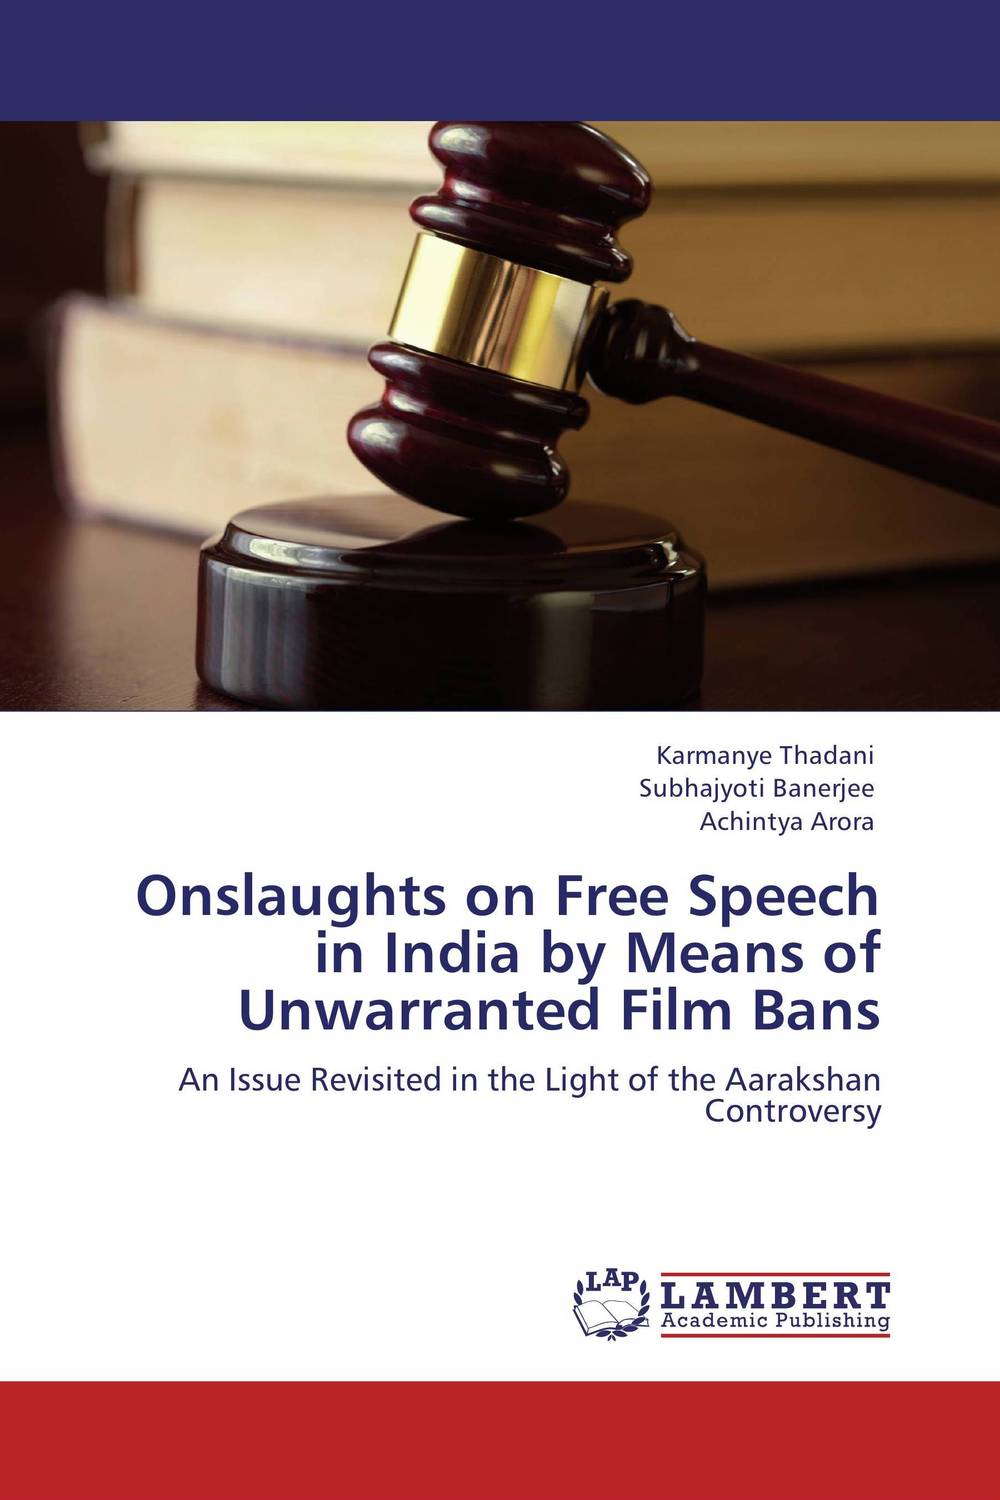 Onslaughts on Free Speech in India by Means of Unwarranted Film Bans